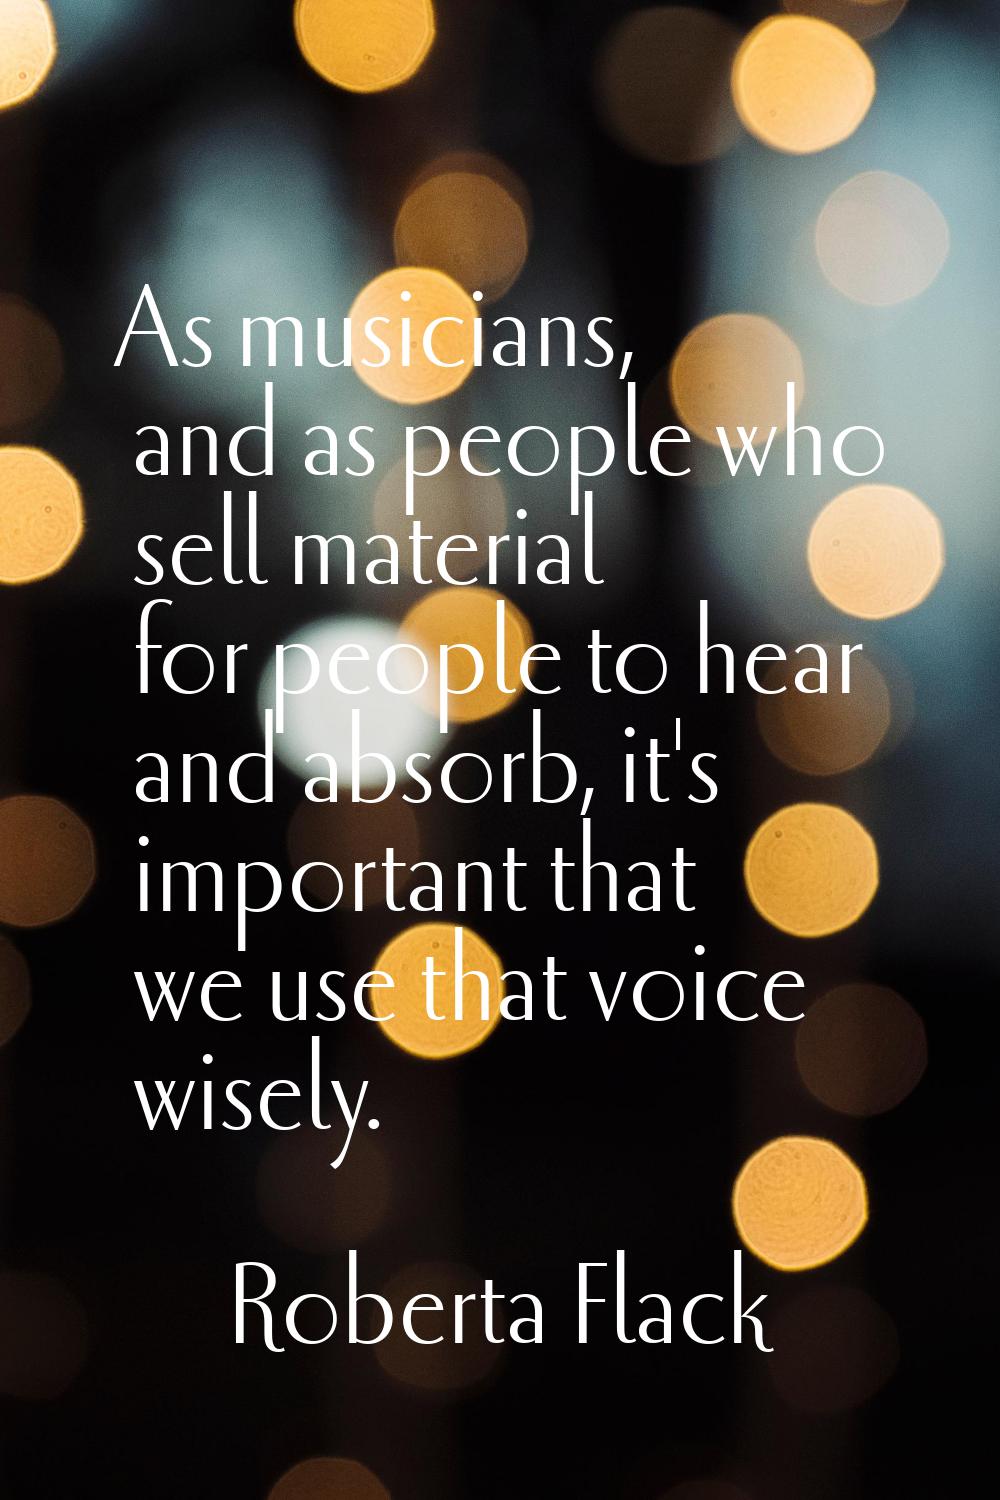 As musicians, and as people who sell material for people to hear and absorb, it's important that we